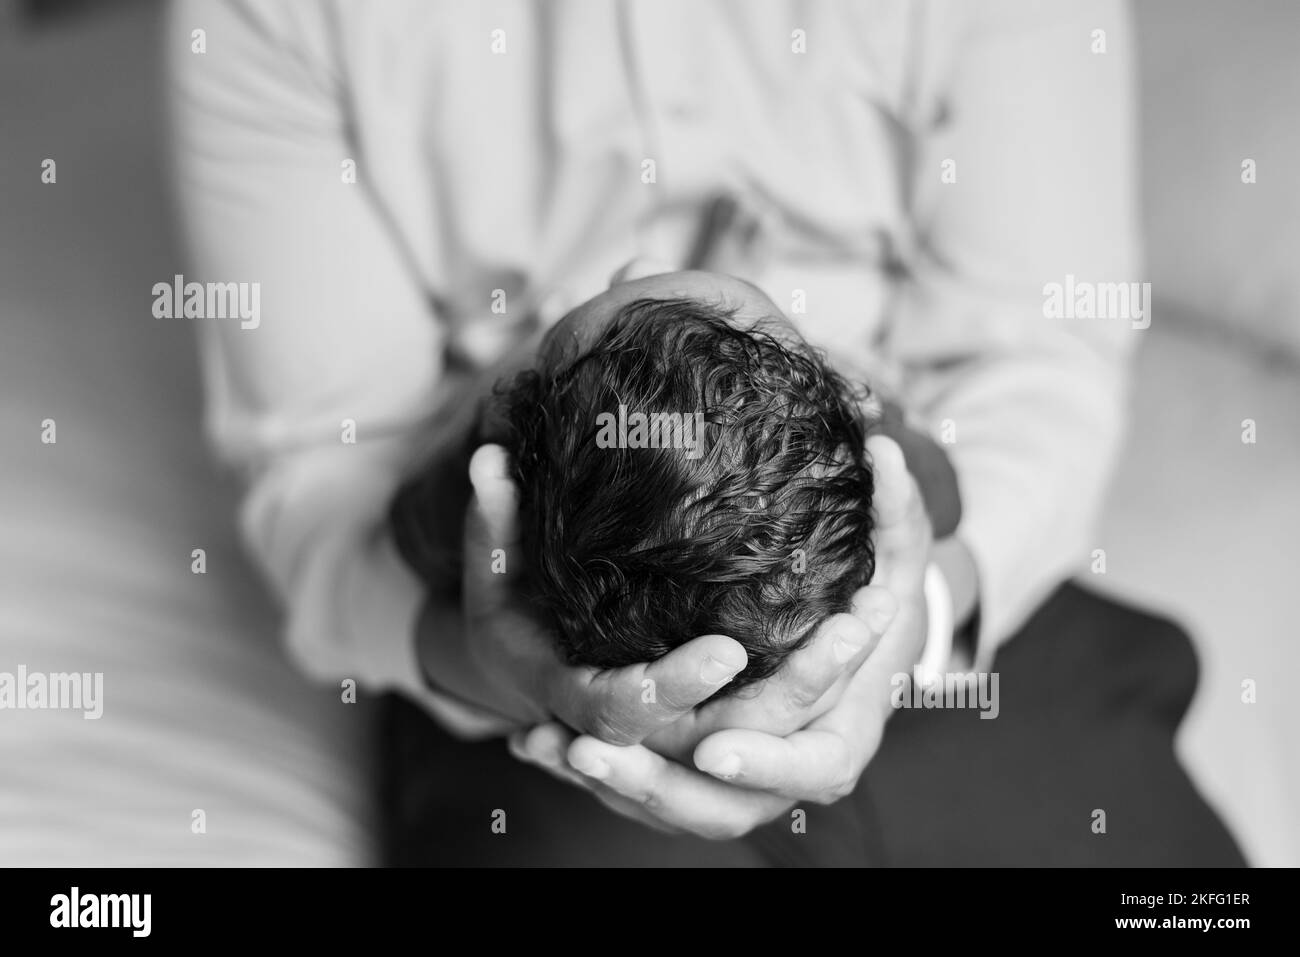 A dad holding his newborn baby in his hands, with a close up of the baby's head and hair Stock Photo